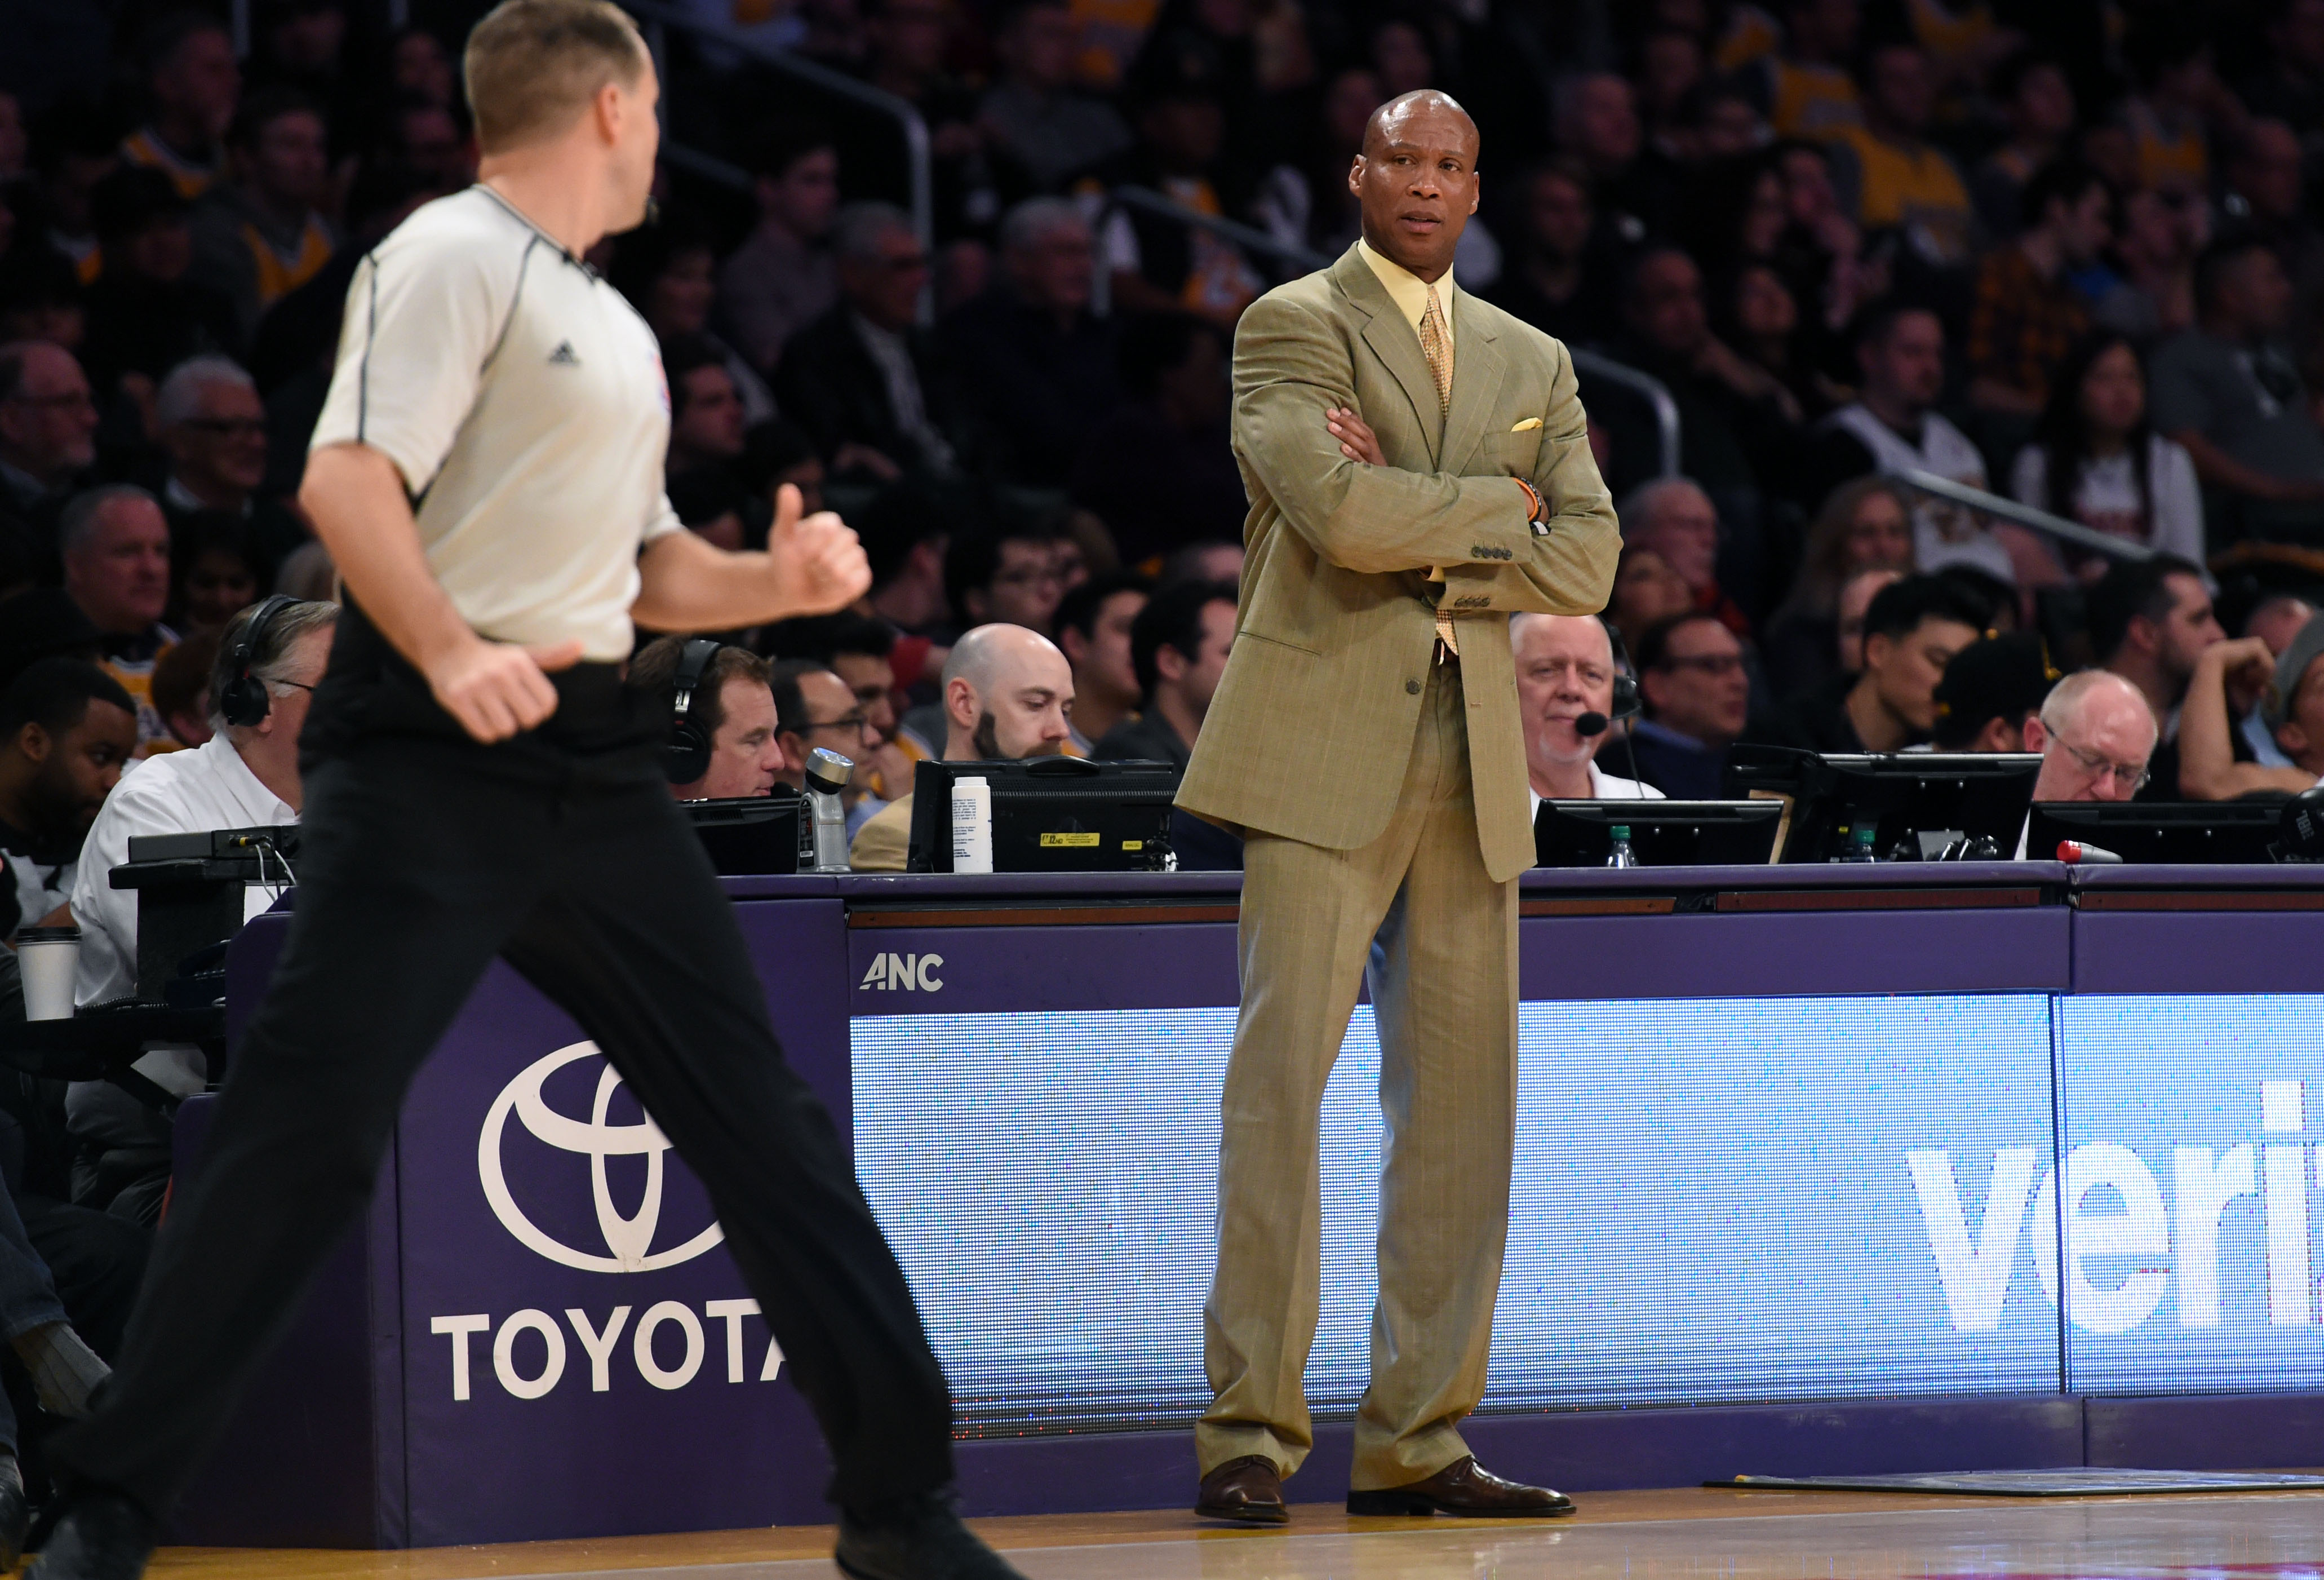 Laker head coach upset with a call against Utah, in the 4th quarter, at the Staples Center. Utah won 86-74. Los Angeles , Calif., Sunday, January,10, 2016. (Photo by Stephen Carr / Daily Breeze)